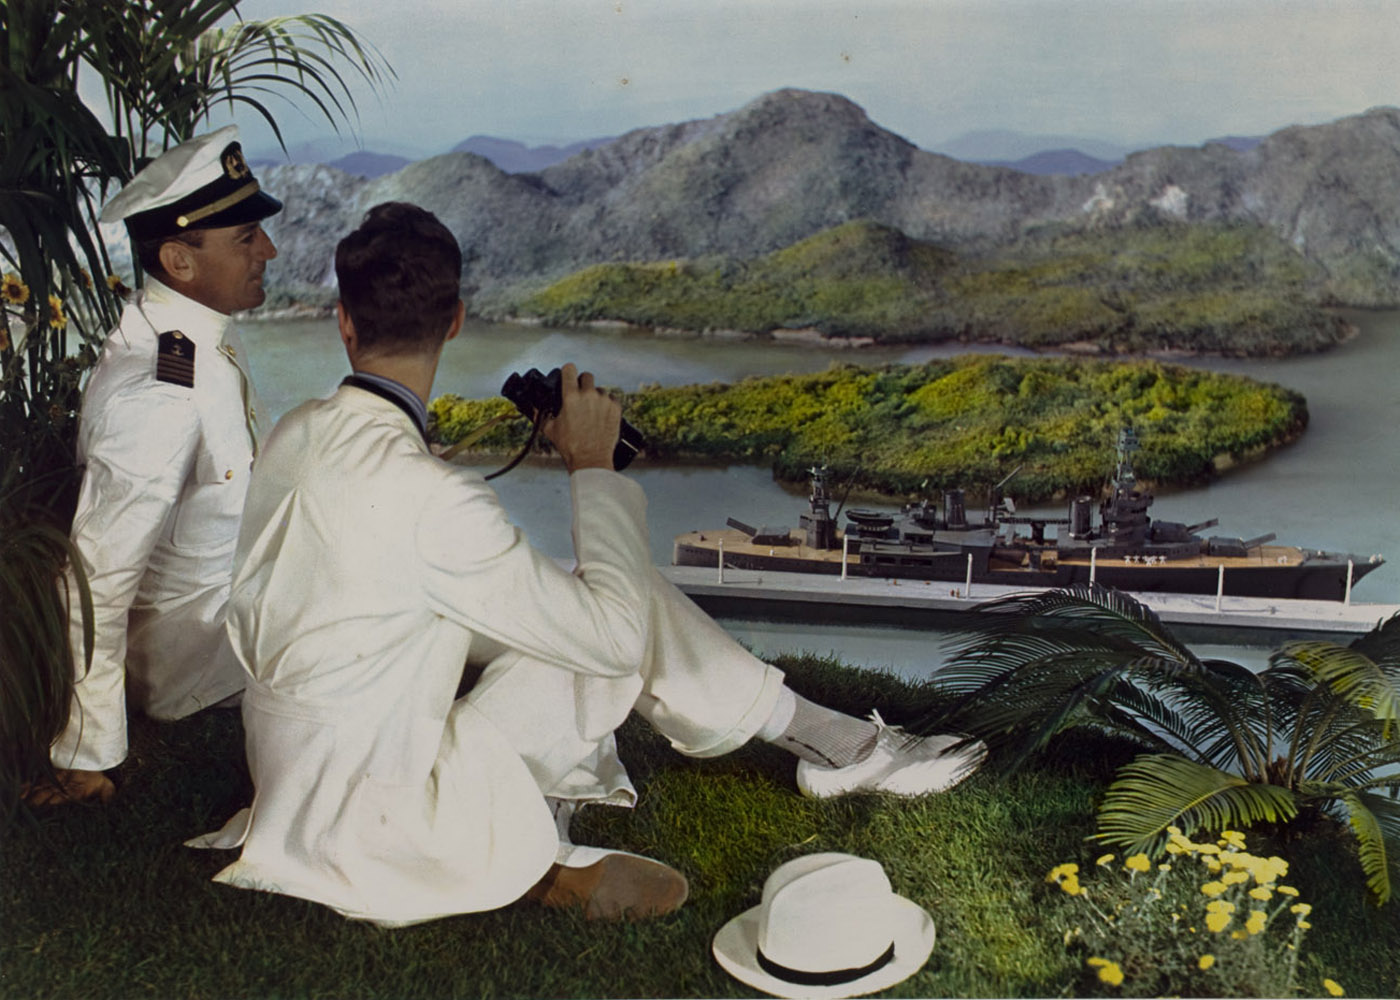 Naval officer and young man on hillside with binoculars, overlooking battleship in bay below, ca. 1950